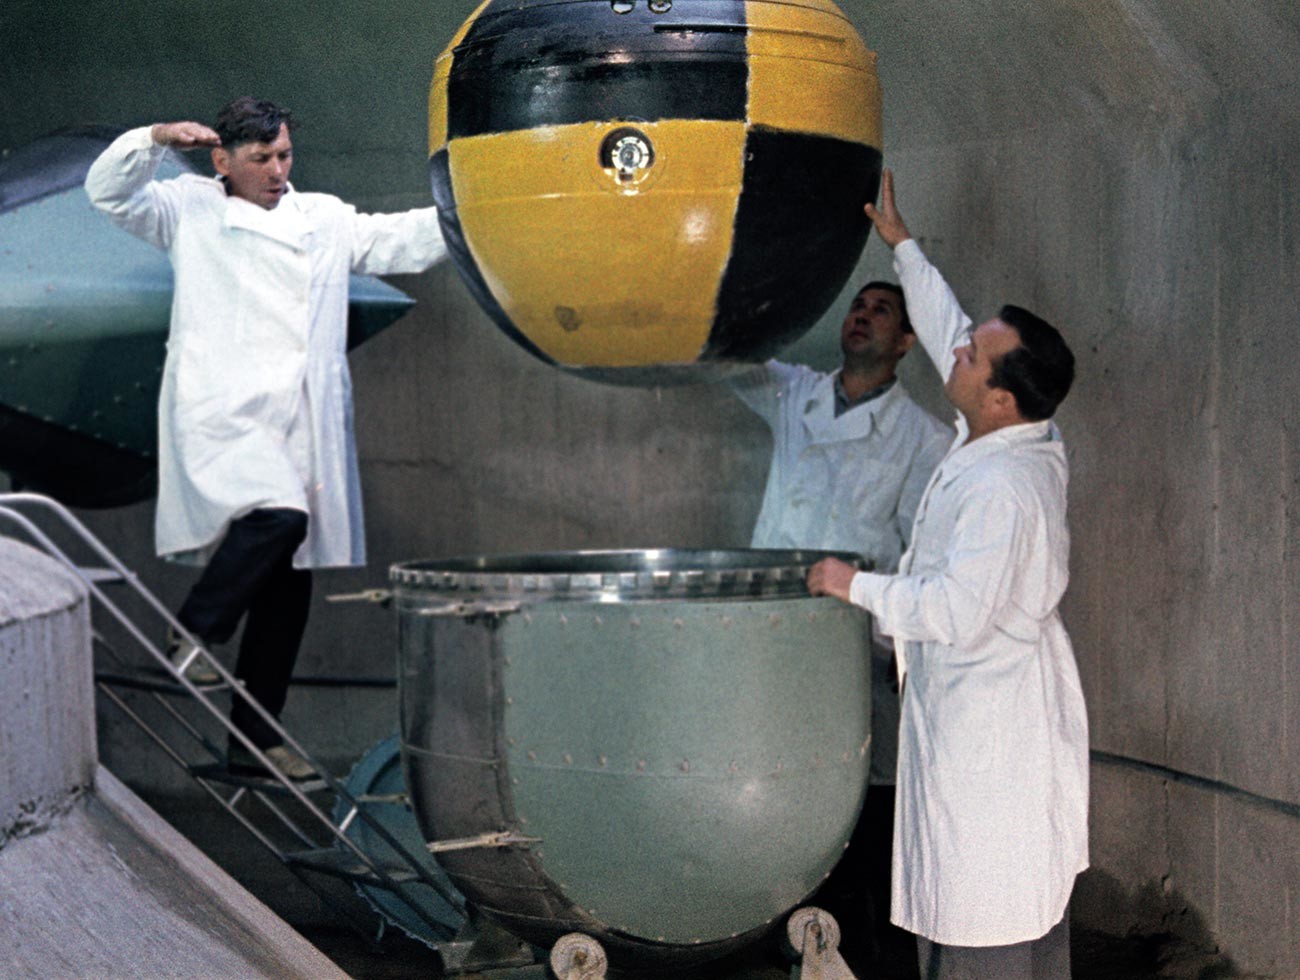 Researchers preparing for the test.